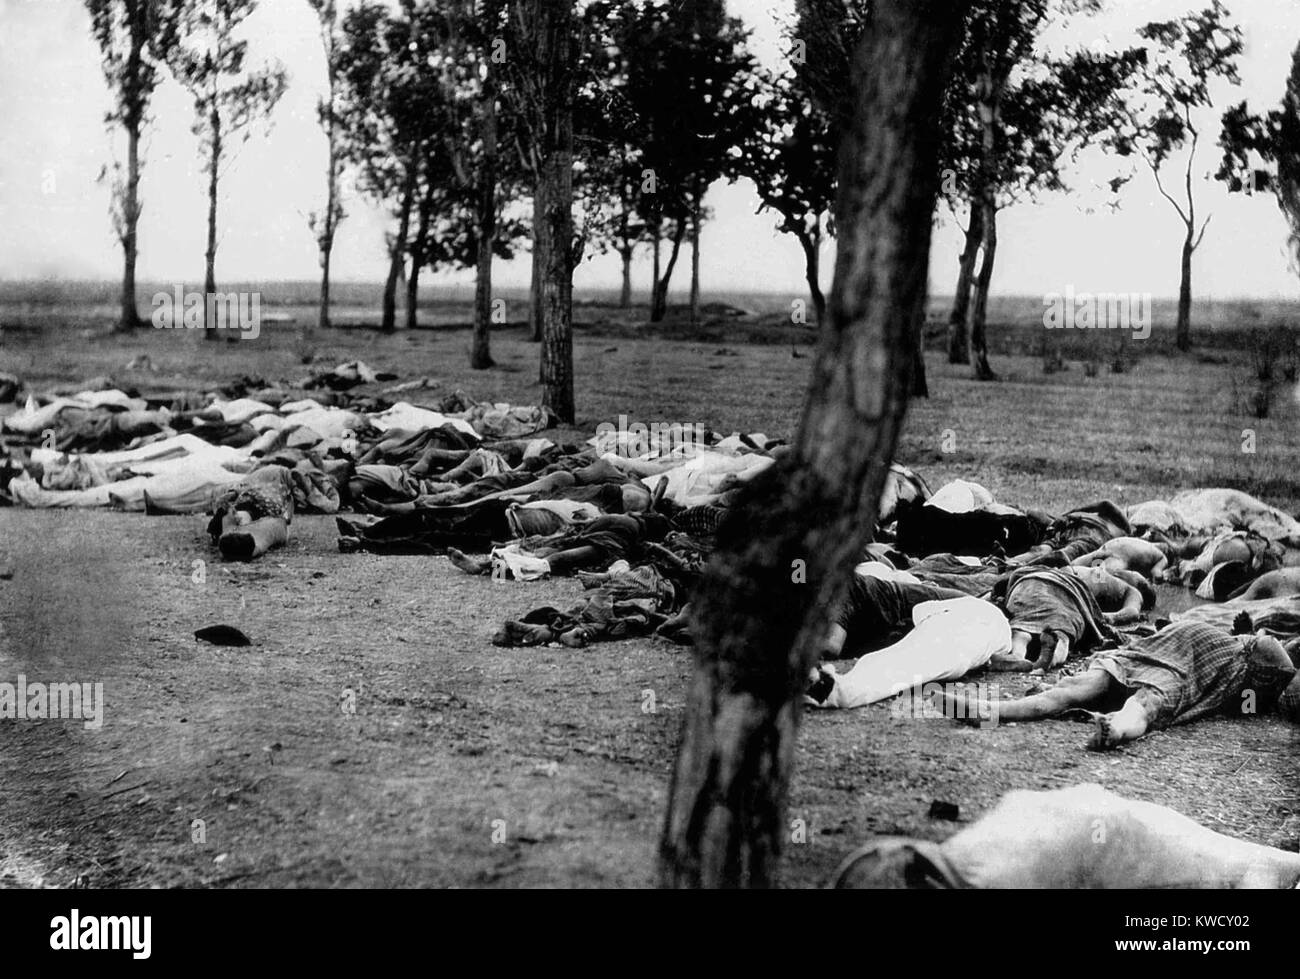 Armenians killed during the Armenian Genocide. Massacre, starvation, and exhaustion destroyed the larger part of the Armenian refugees in 1915. Turkish policy was that of extermination under the guise of deportation (BSLOC 2017 1 162) Stock Photo